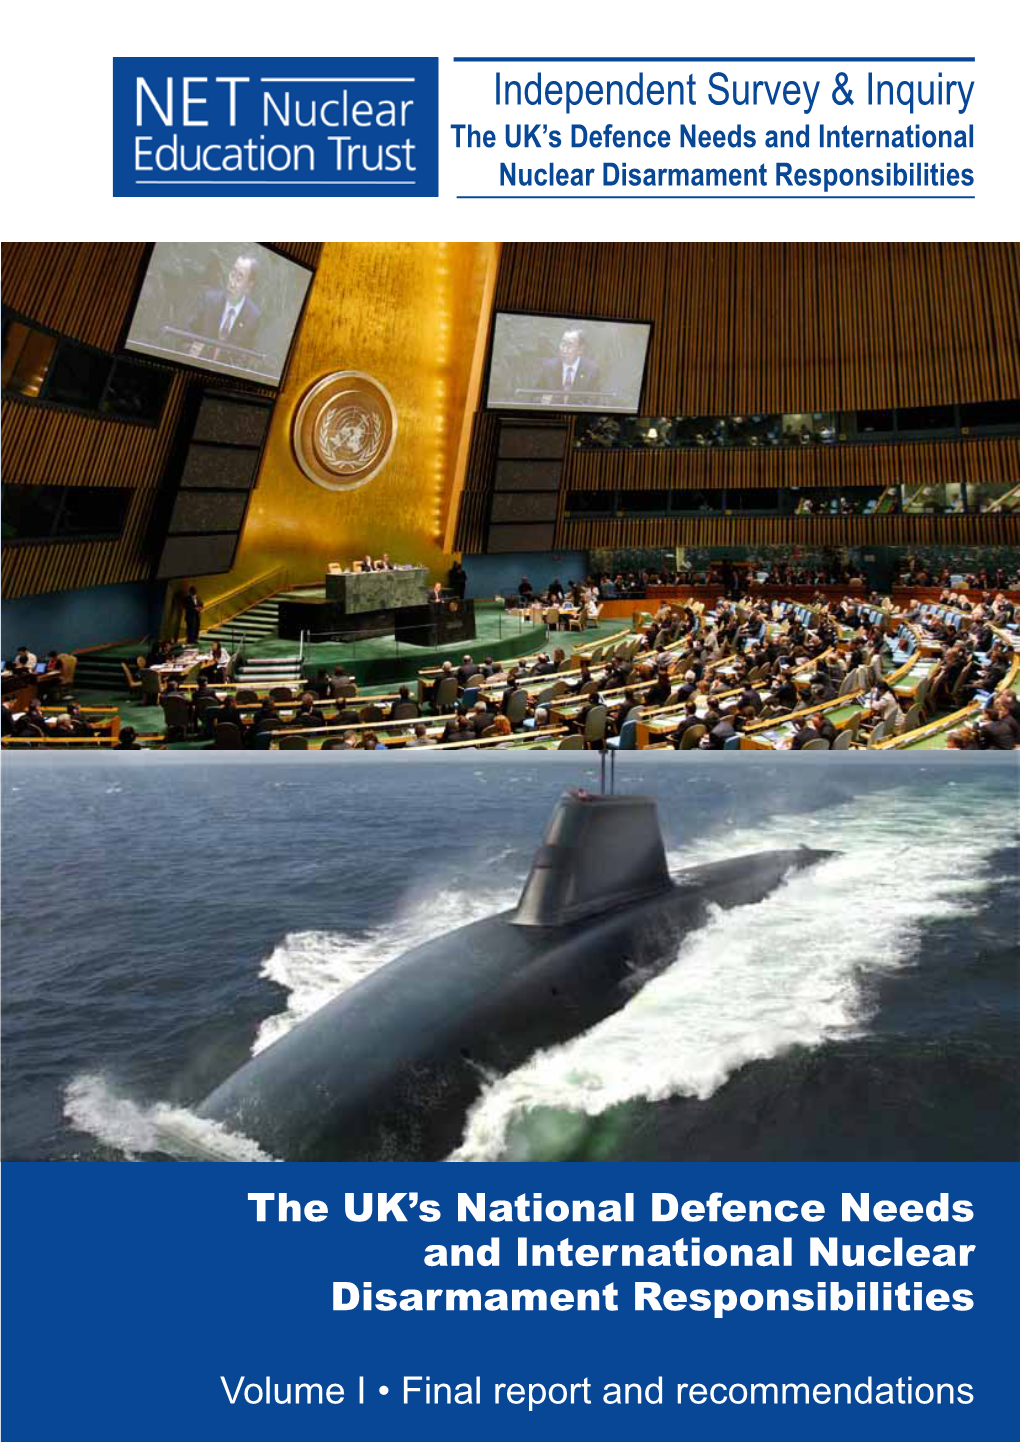 The UK's National Defence Needs And